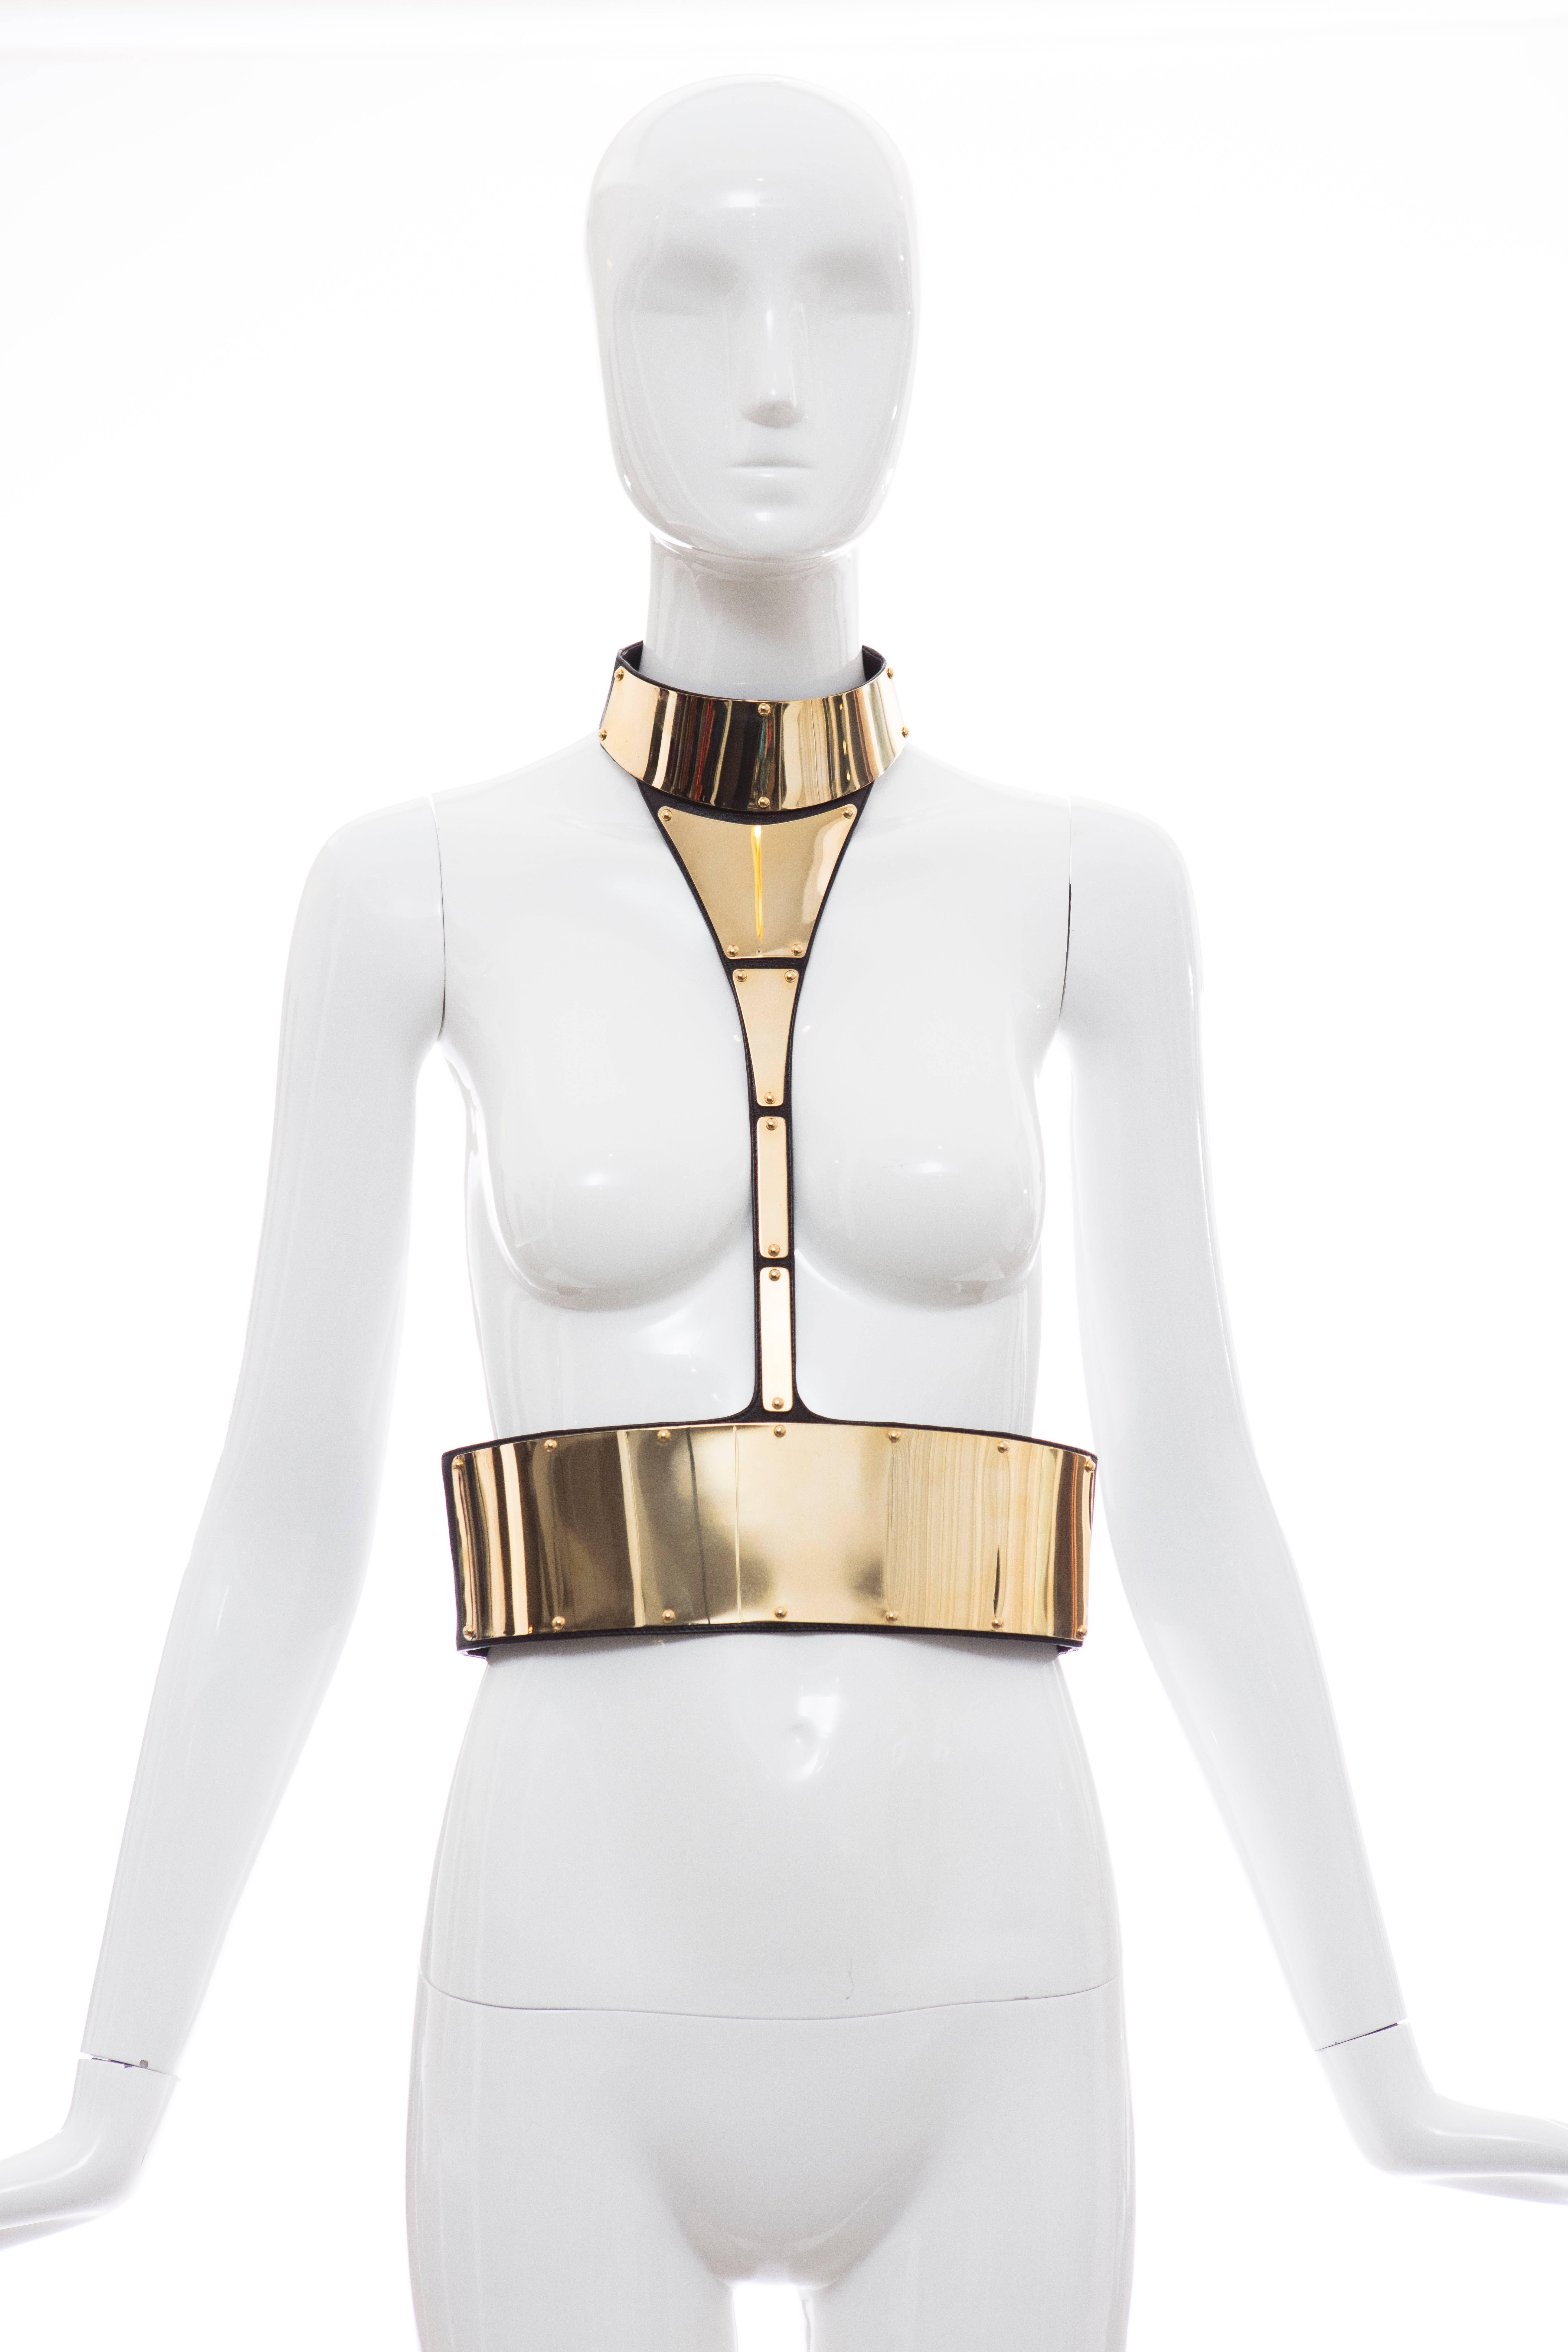  Giuseppe Zanotti body harness with gold-tone metal plates and back black leather and elasticized trim with dual snap closures at nape and center back.

IT. Medium
US. Medium

Measurements: Neck 15", Length 16", Waist 28"

Featured in